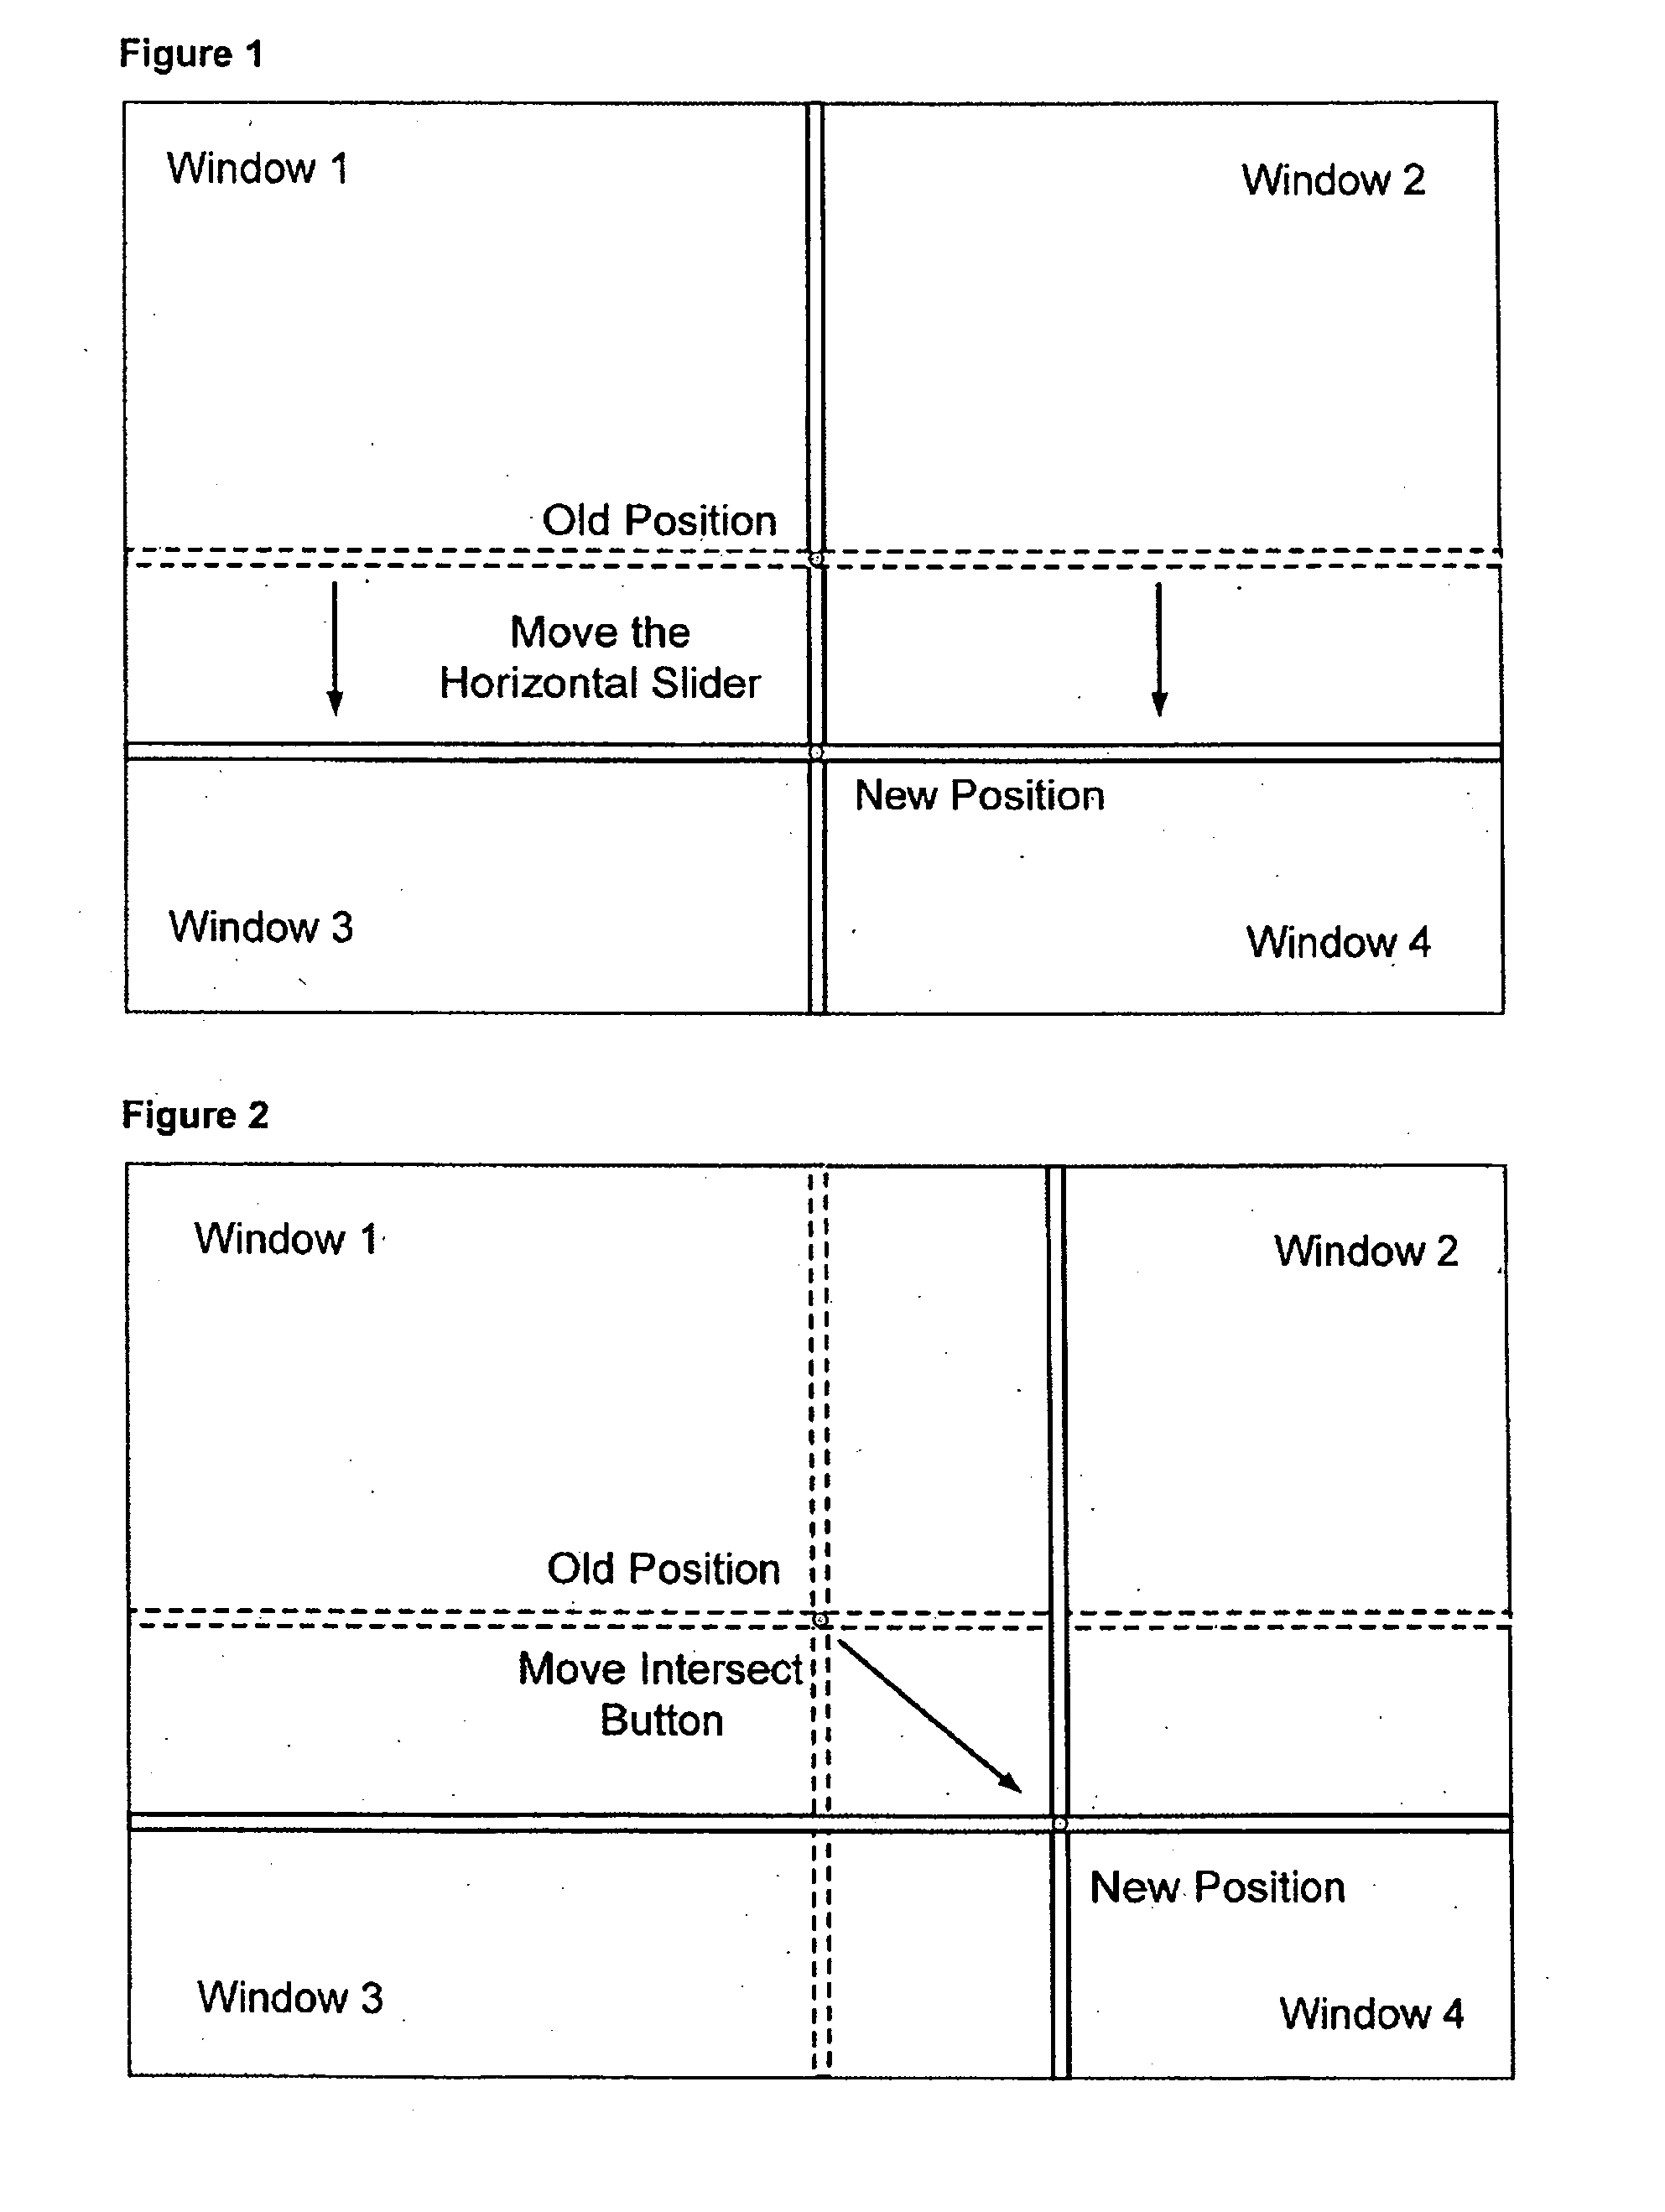 Method and apparatus for the display and/or processing of information, such as data